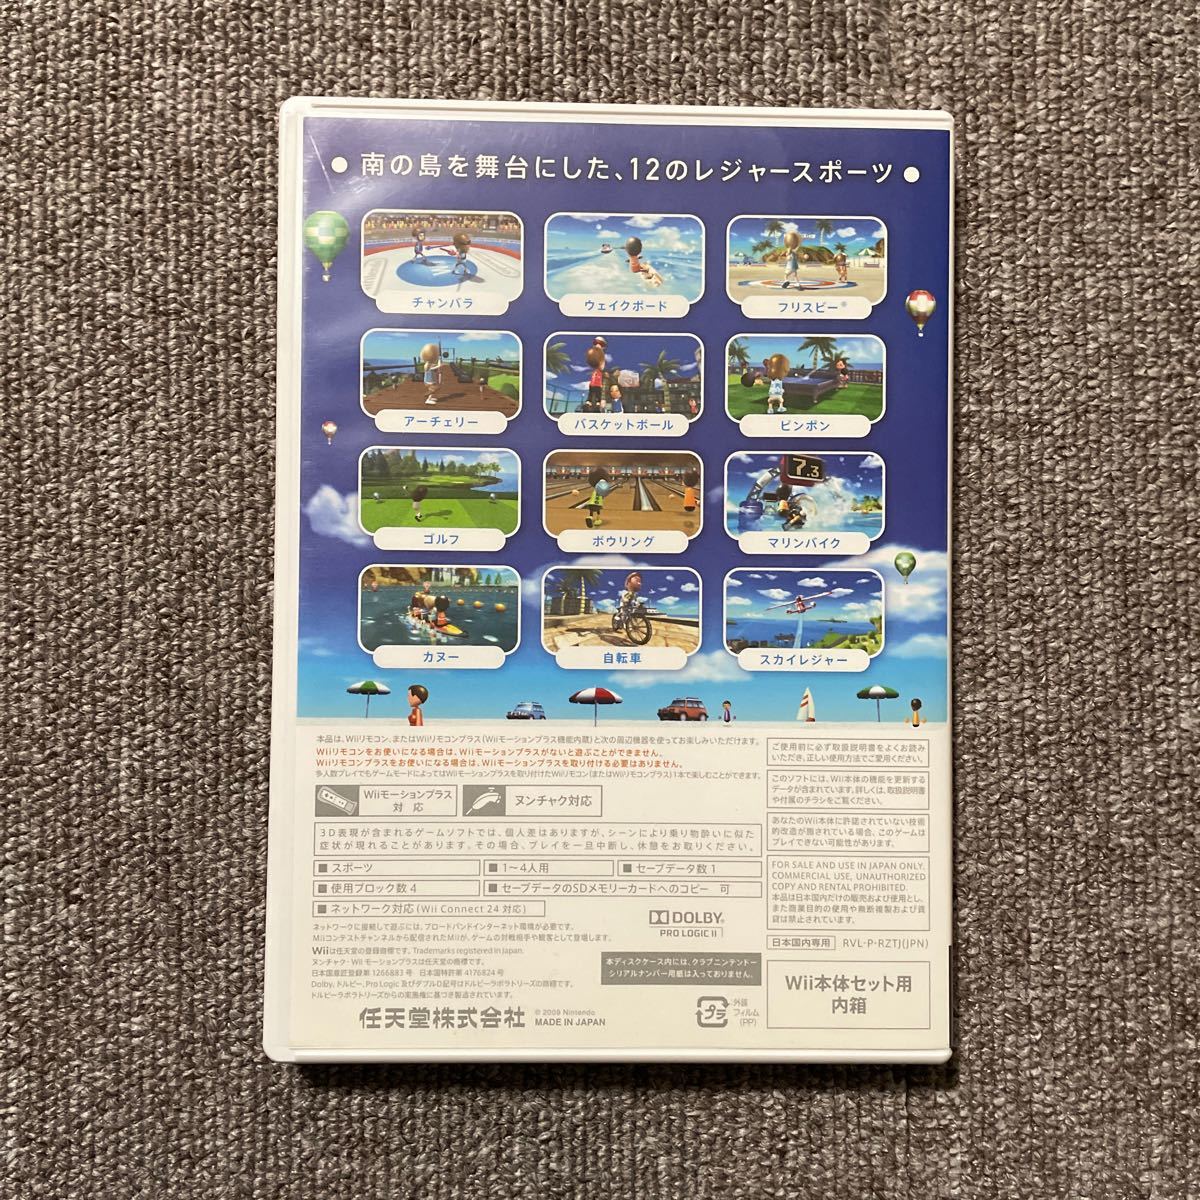 wii Sports Resort  wiiスポーツリゾート